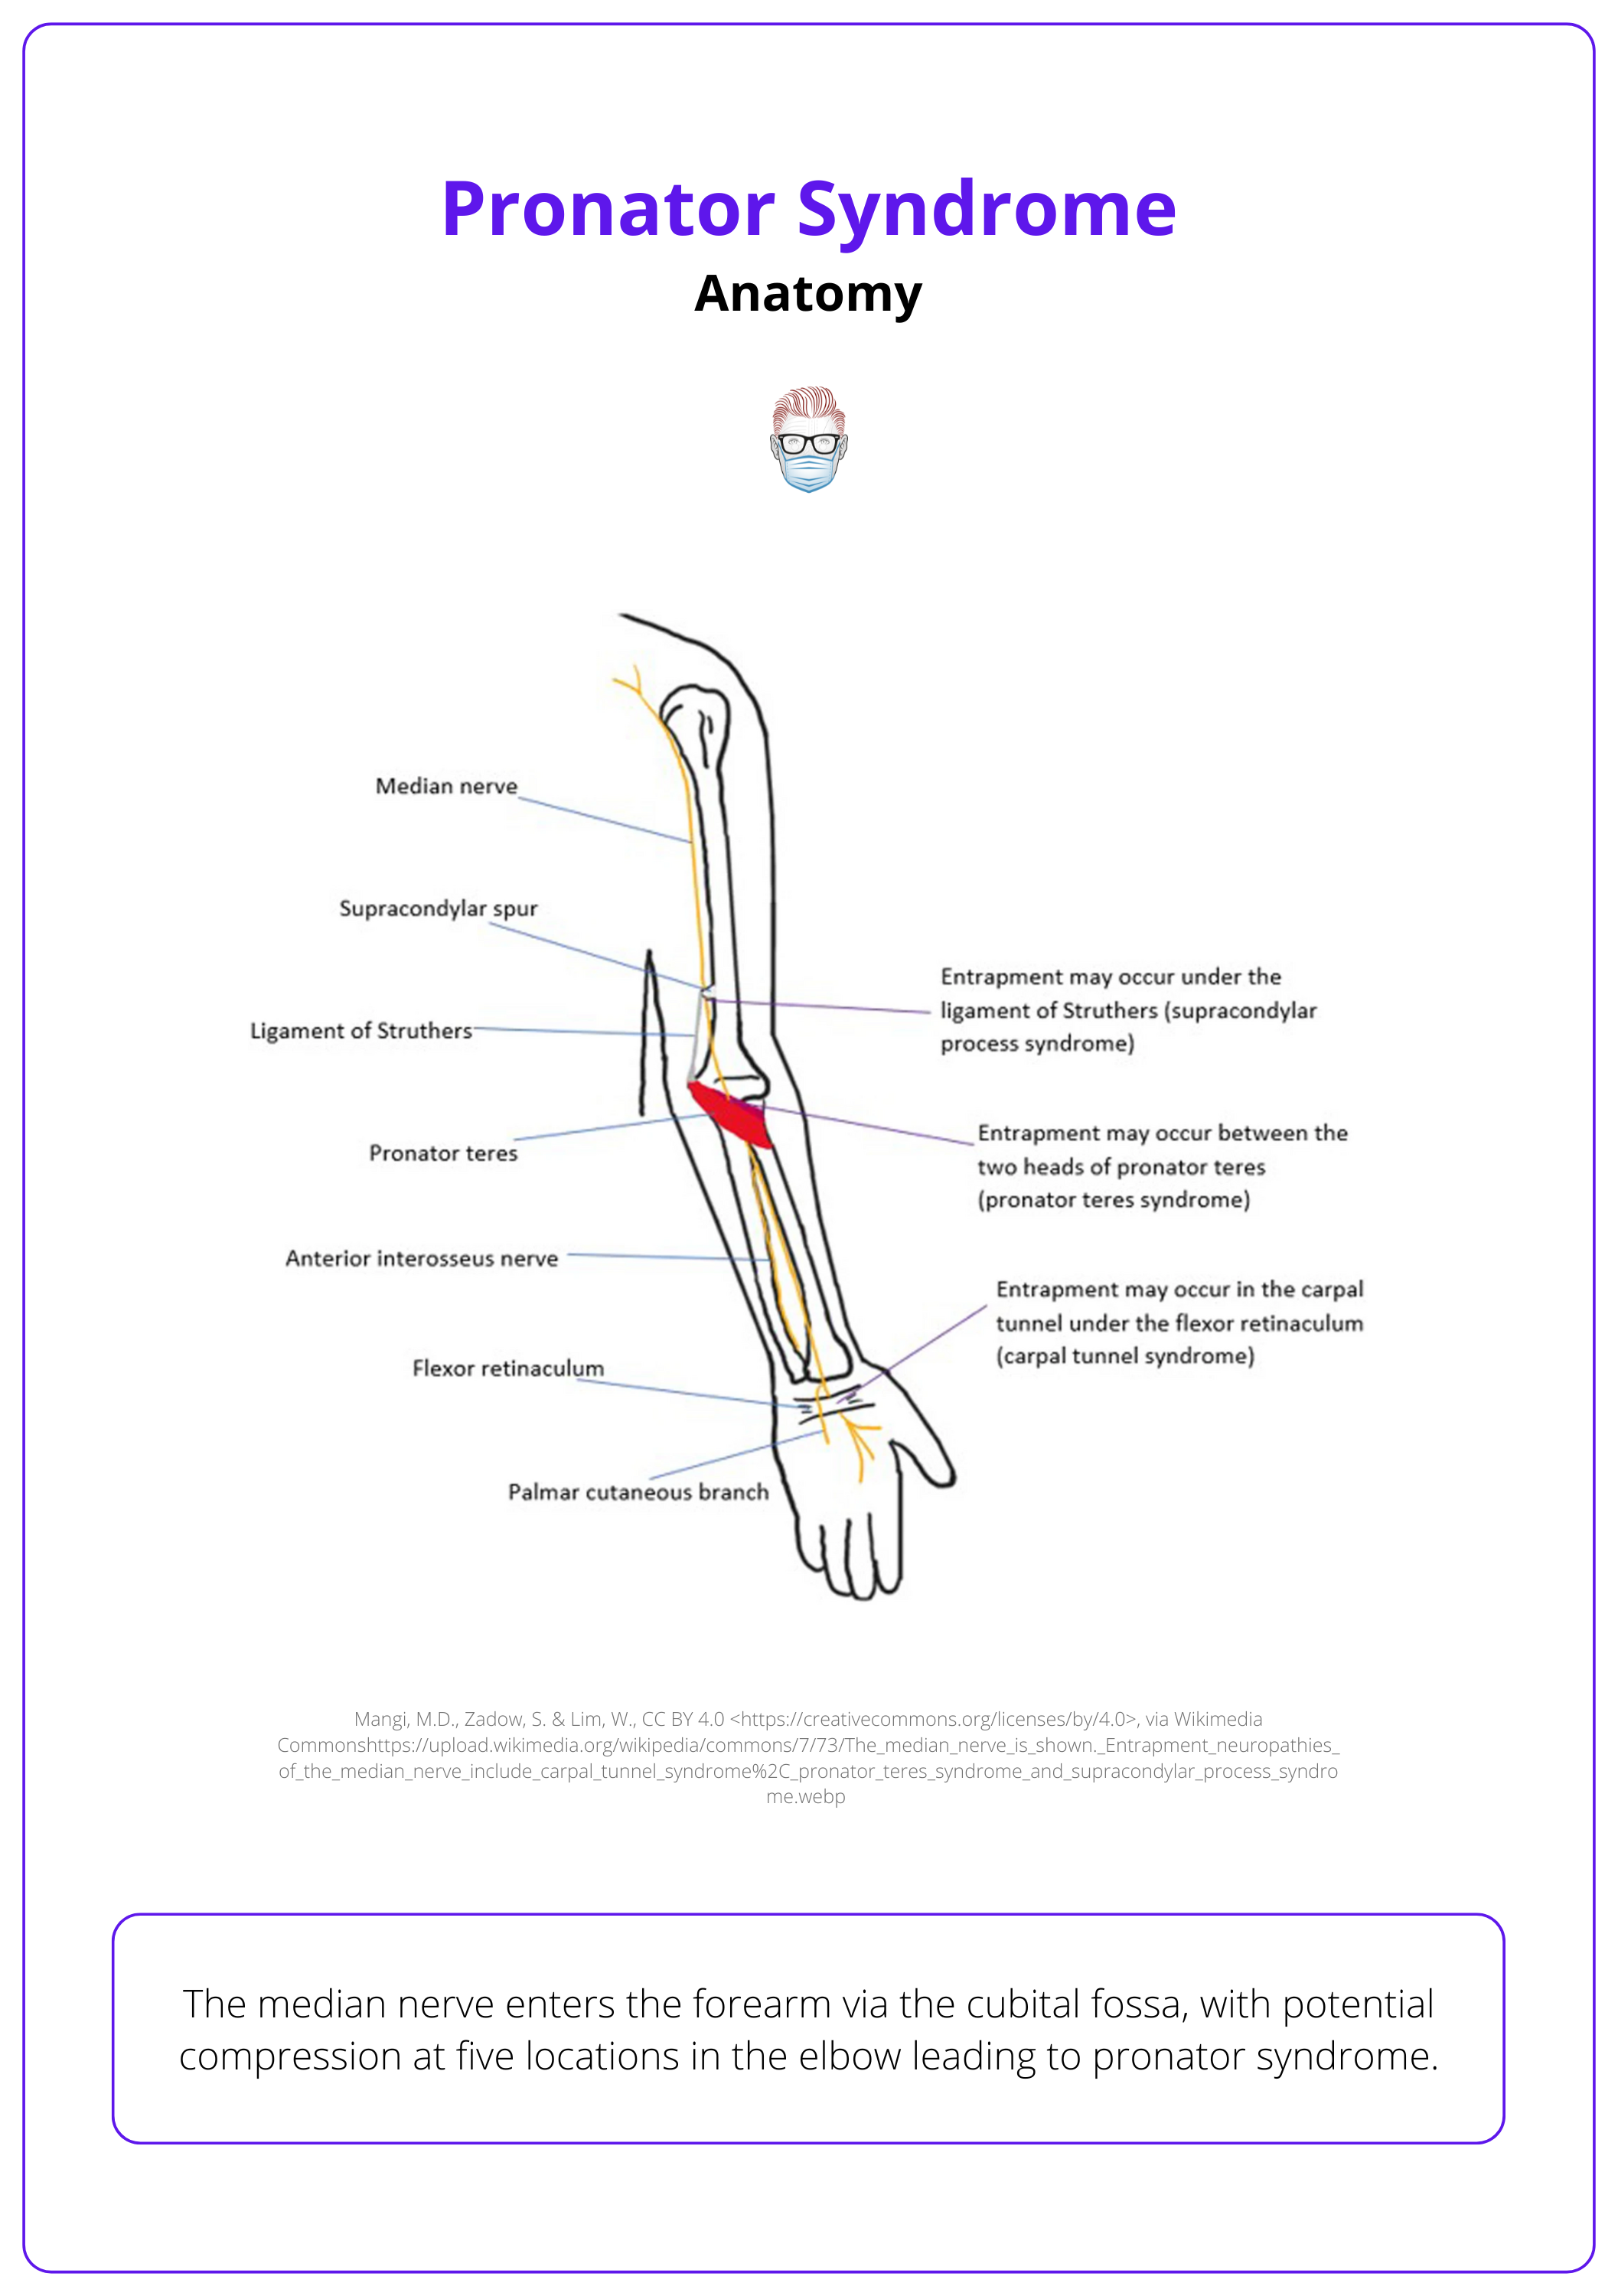 Median nerve neuropathy, compression neuropathy, pronator syndrome, carpal tunnel syndrome